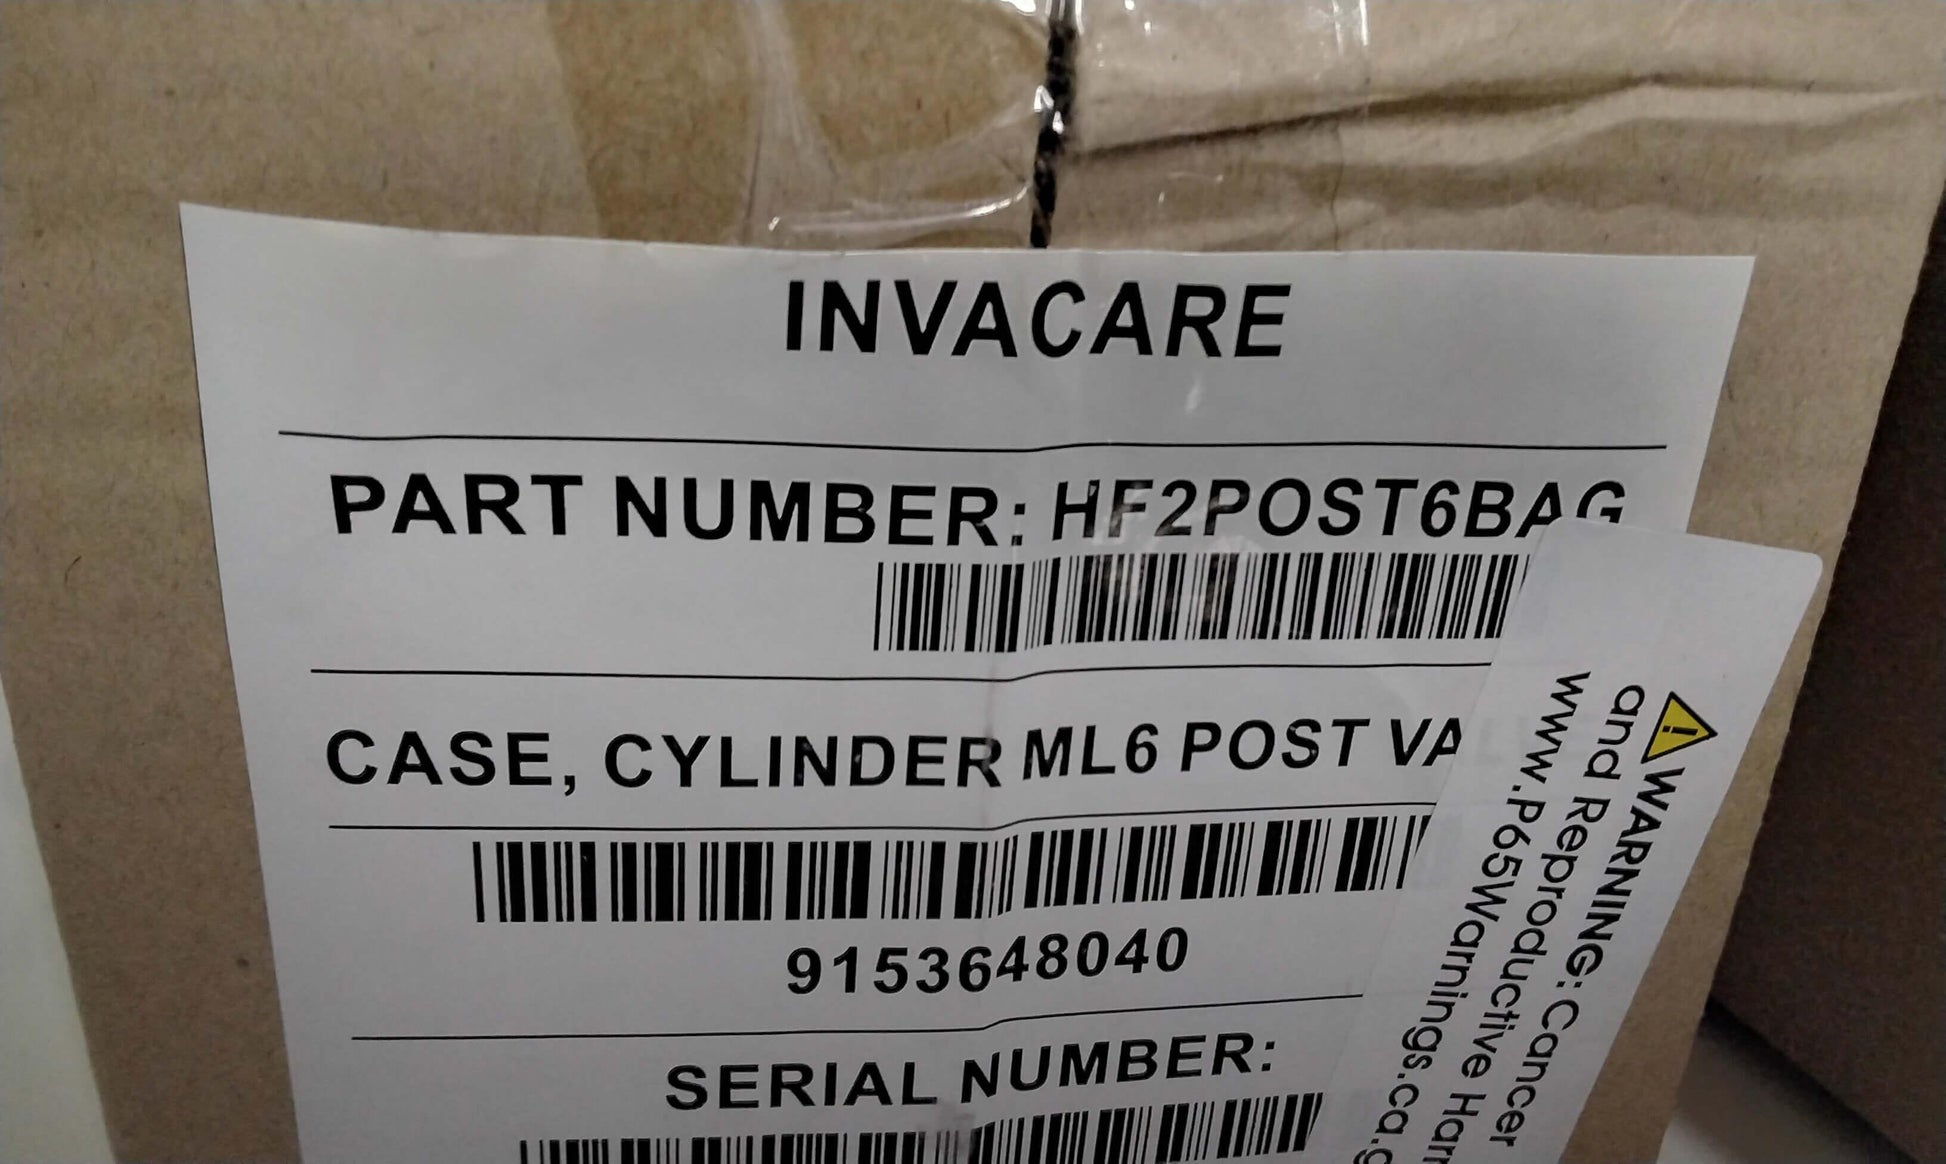 NEW Invacare ML6 Post Valve Oxygen Cylinder Tank and Carrying Bag HF2POST6KIT with Free Shipping and Warranty - MBR Medicals